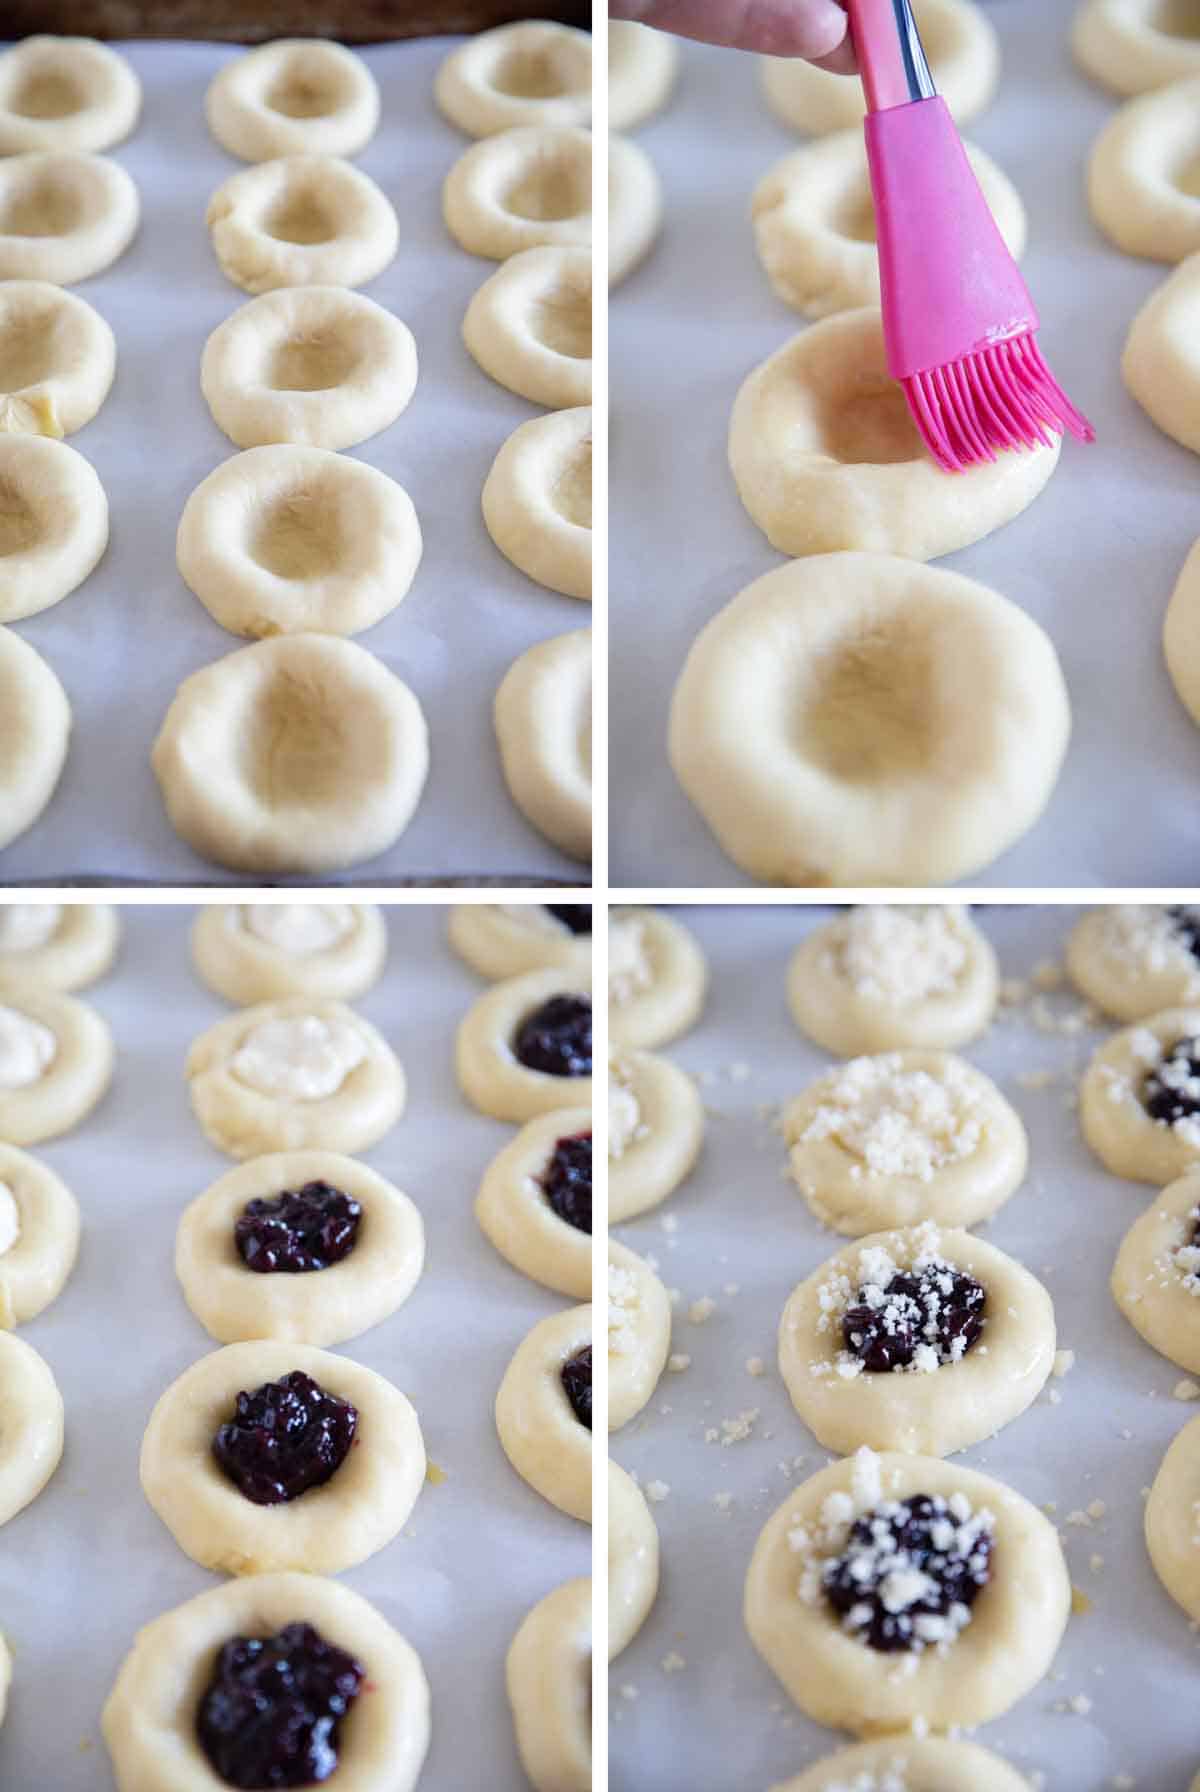 shaping kolaches and adding filling